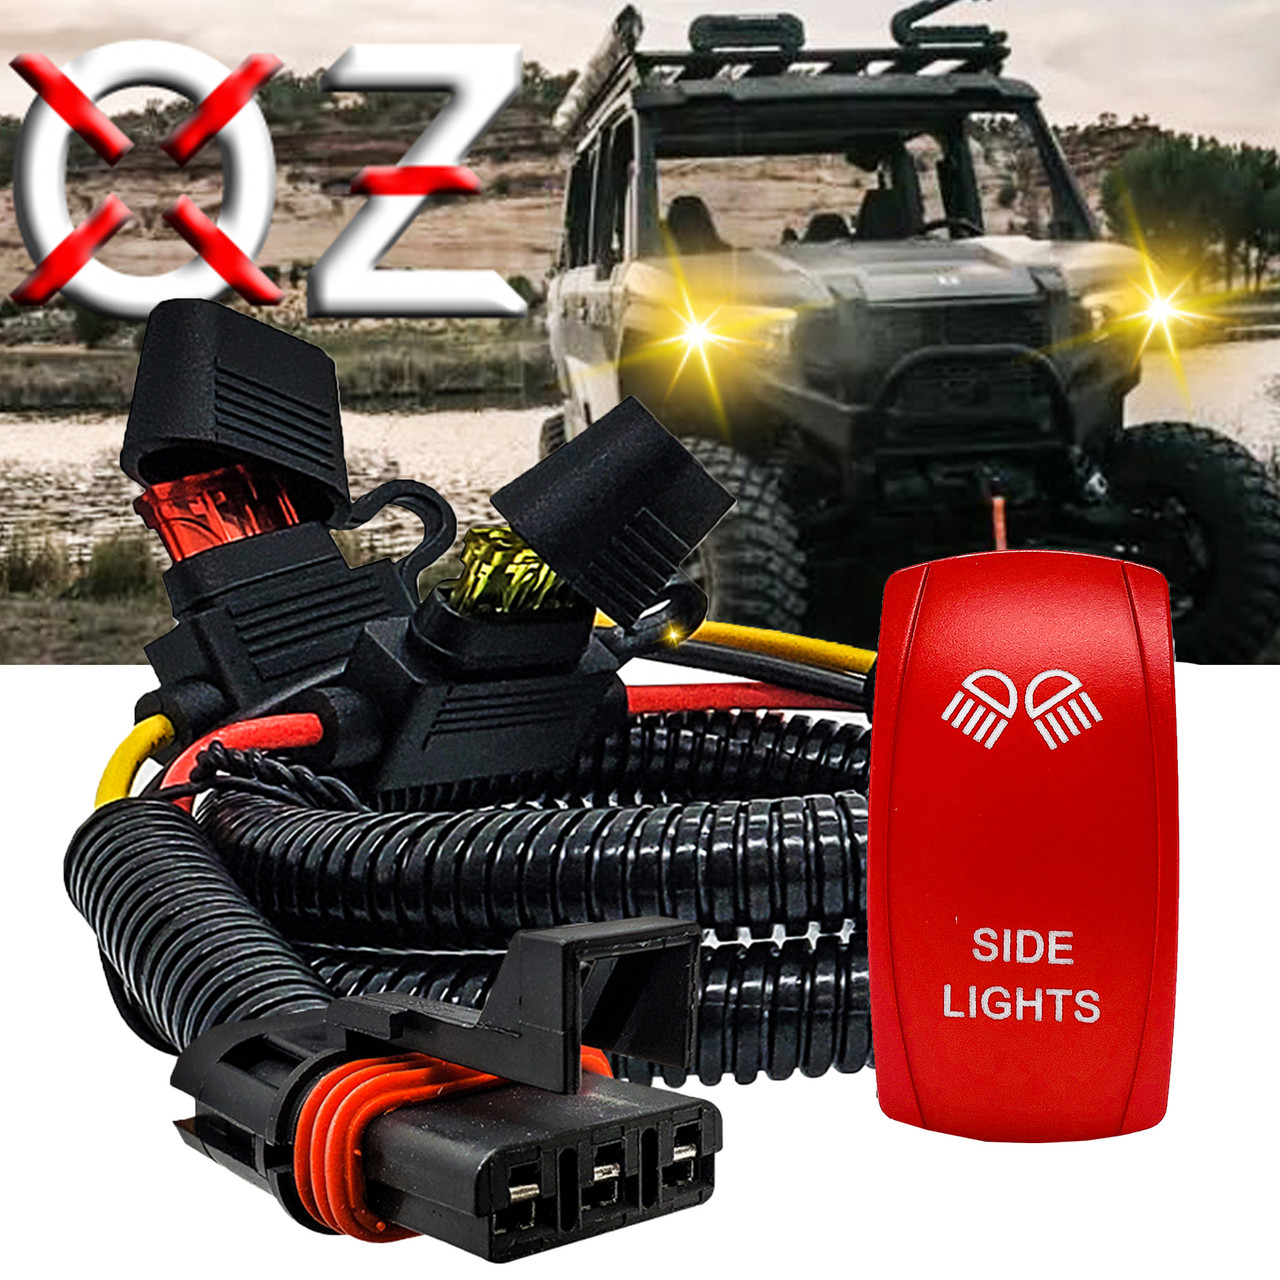 3 POD Side Lights Spot Beam with Power Bus Bar Dual DT Plug Wire Harness  Kit Compatible with Pulse Power Busbar Polaris RZR Turbo Pro XP Ranger Crew